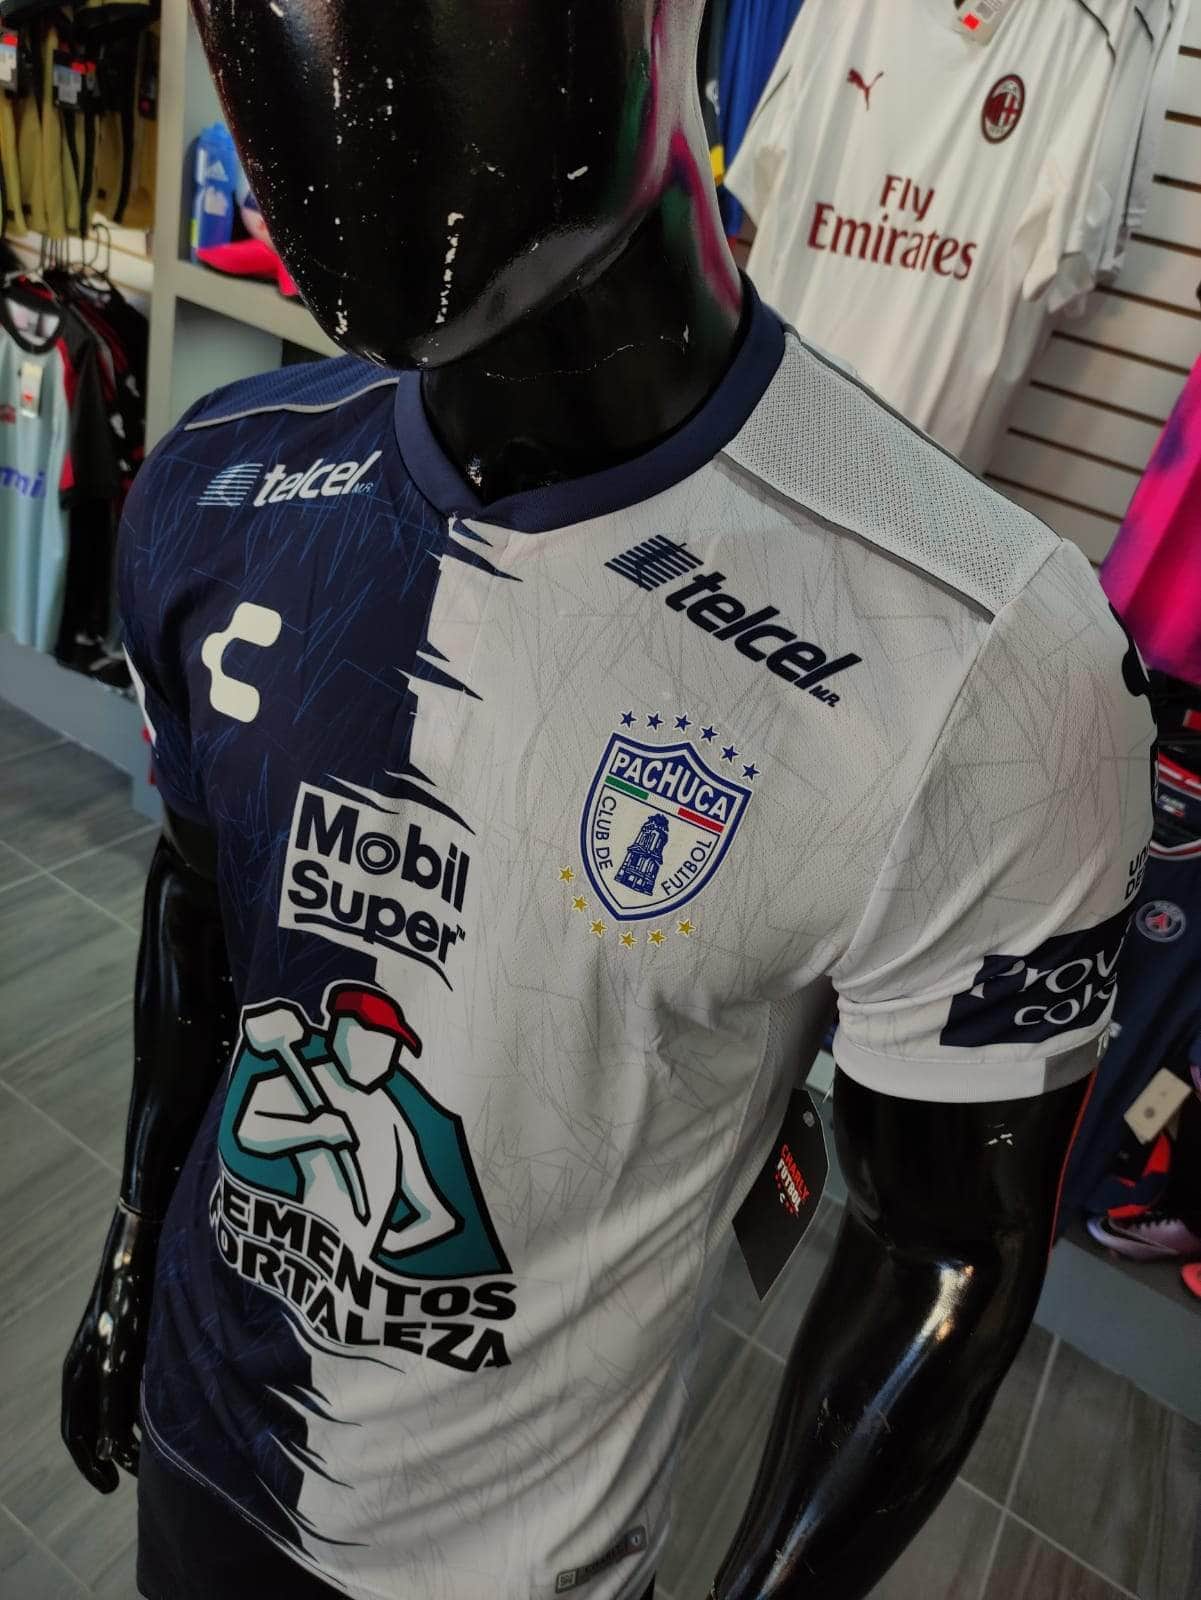 Charly JERSEY Jersey Charly Pachuca 2019-2020 Local